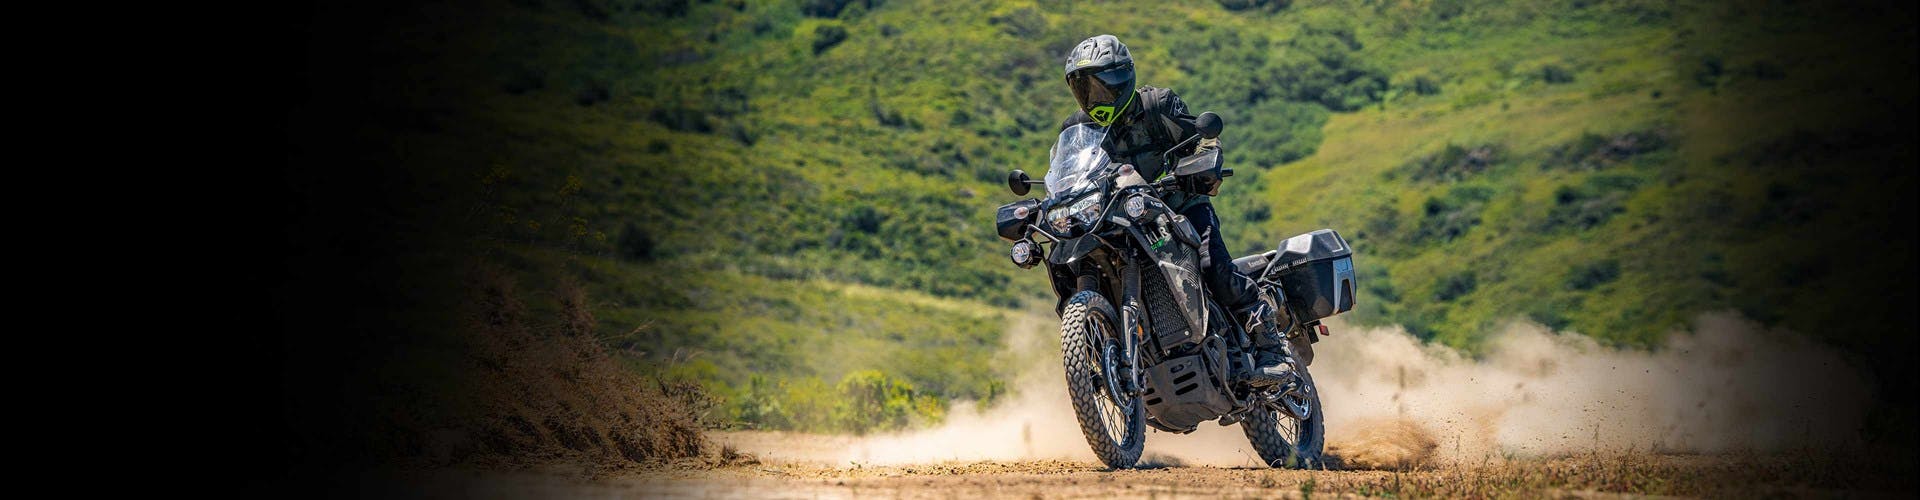 Kawasaki KLR650 Adventure in cypher camo gray colour in action on off-road track